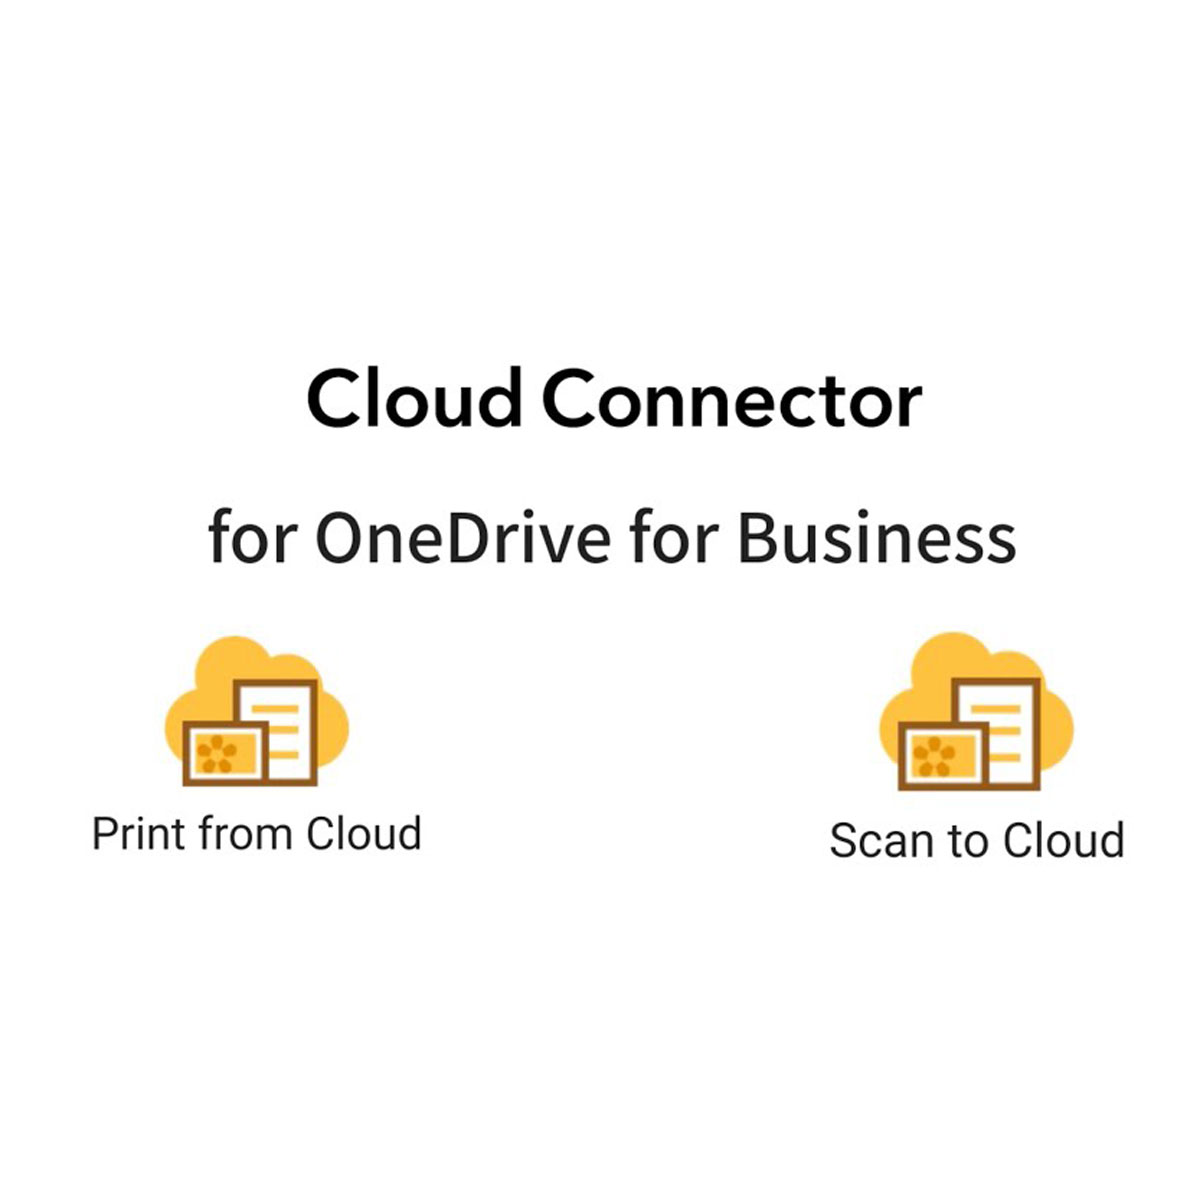 Cloud Connector for One Drive